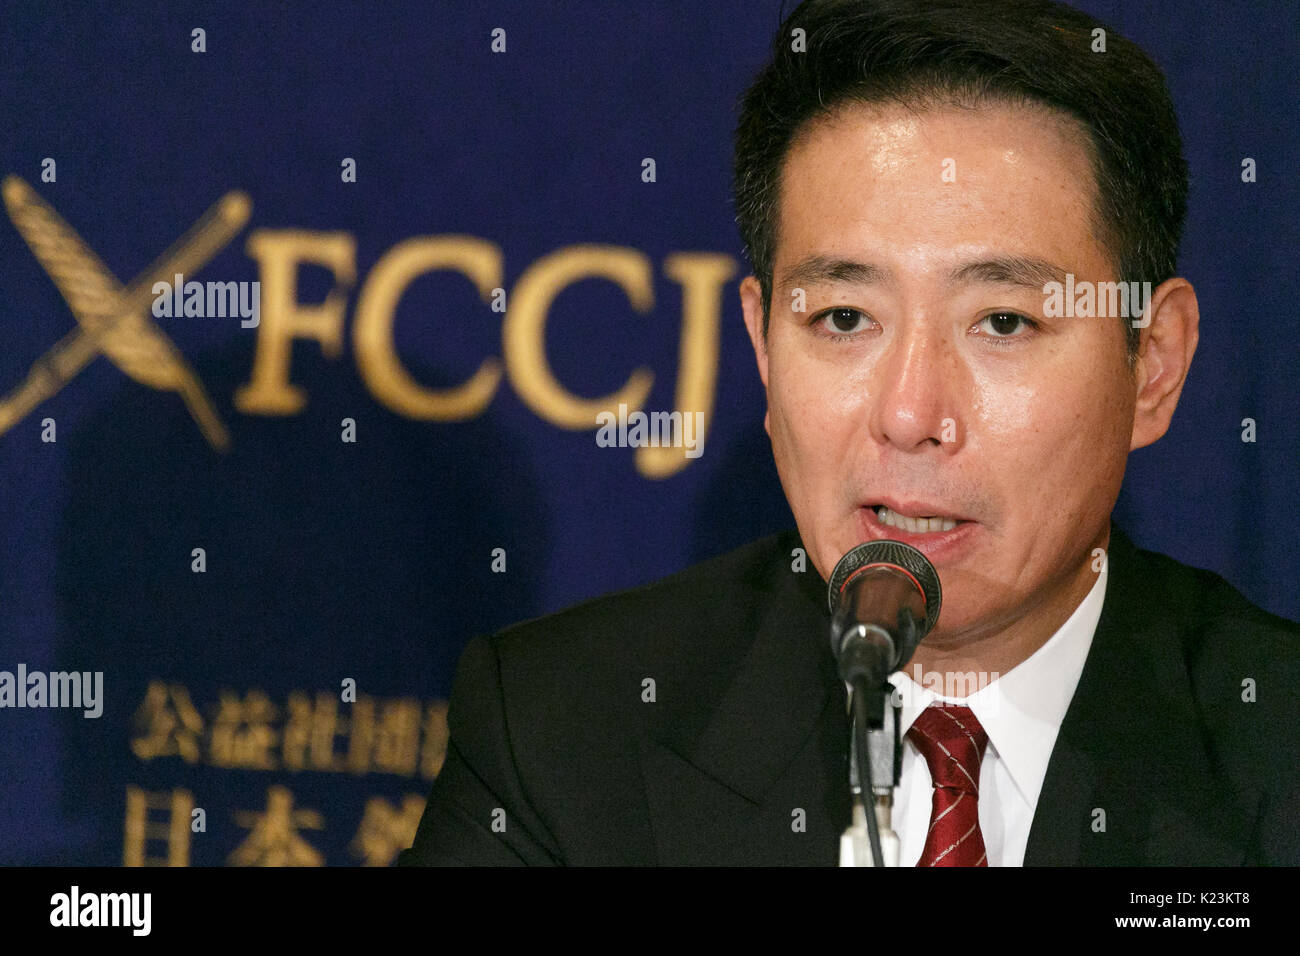 Former DP Foreign Minister Seiji Maehara speaks during a news conference at the Foreign Correspondents' Club of Japan on August 29, 2017, Tokyo, Japan. Maehara and Former Democratic Party (DP) Secretary General, Yukio Edano, visited the Club to speak about the opposition party's leadership election which will be held on September 1st. They also commented North Korea's missile launch that flew over Japan this morning. Credit: Rodrigo Reyes Marin/AFLO/Alamy Live News Stock Photo